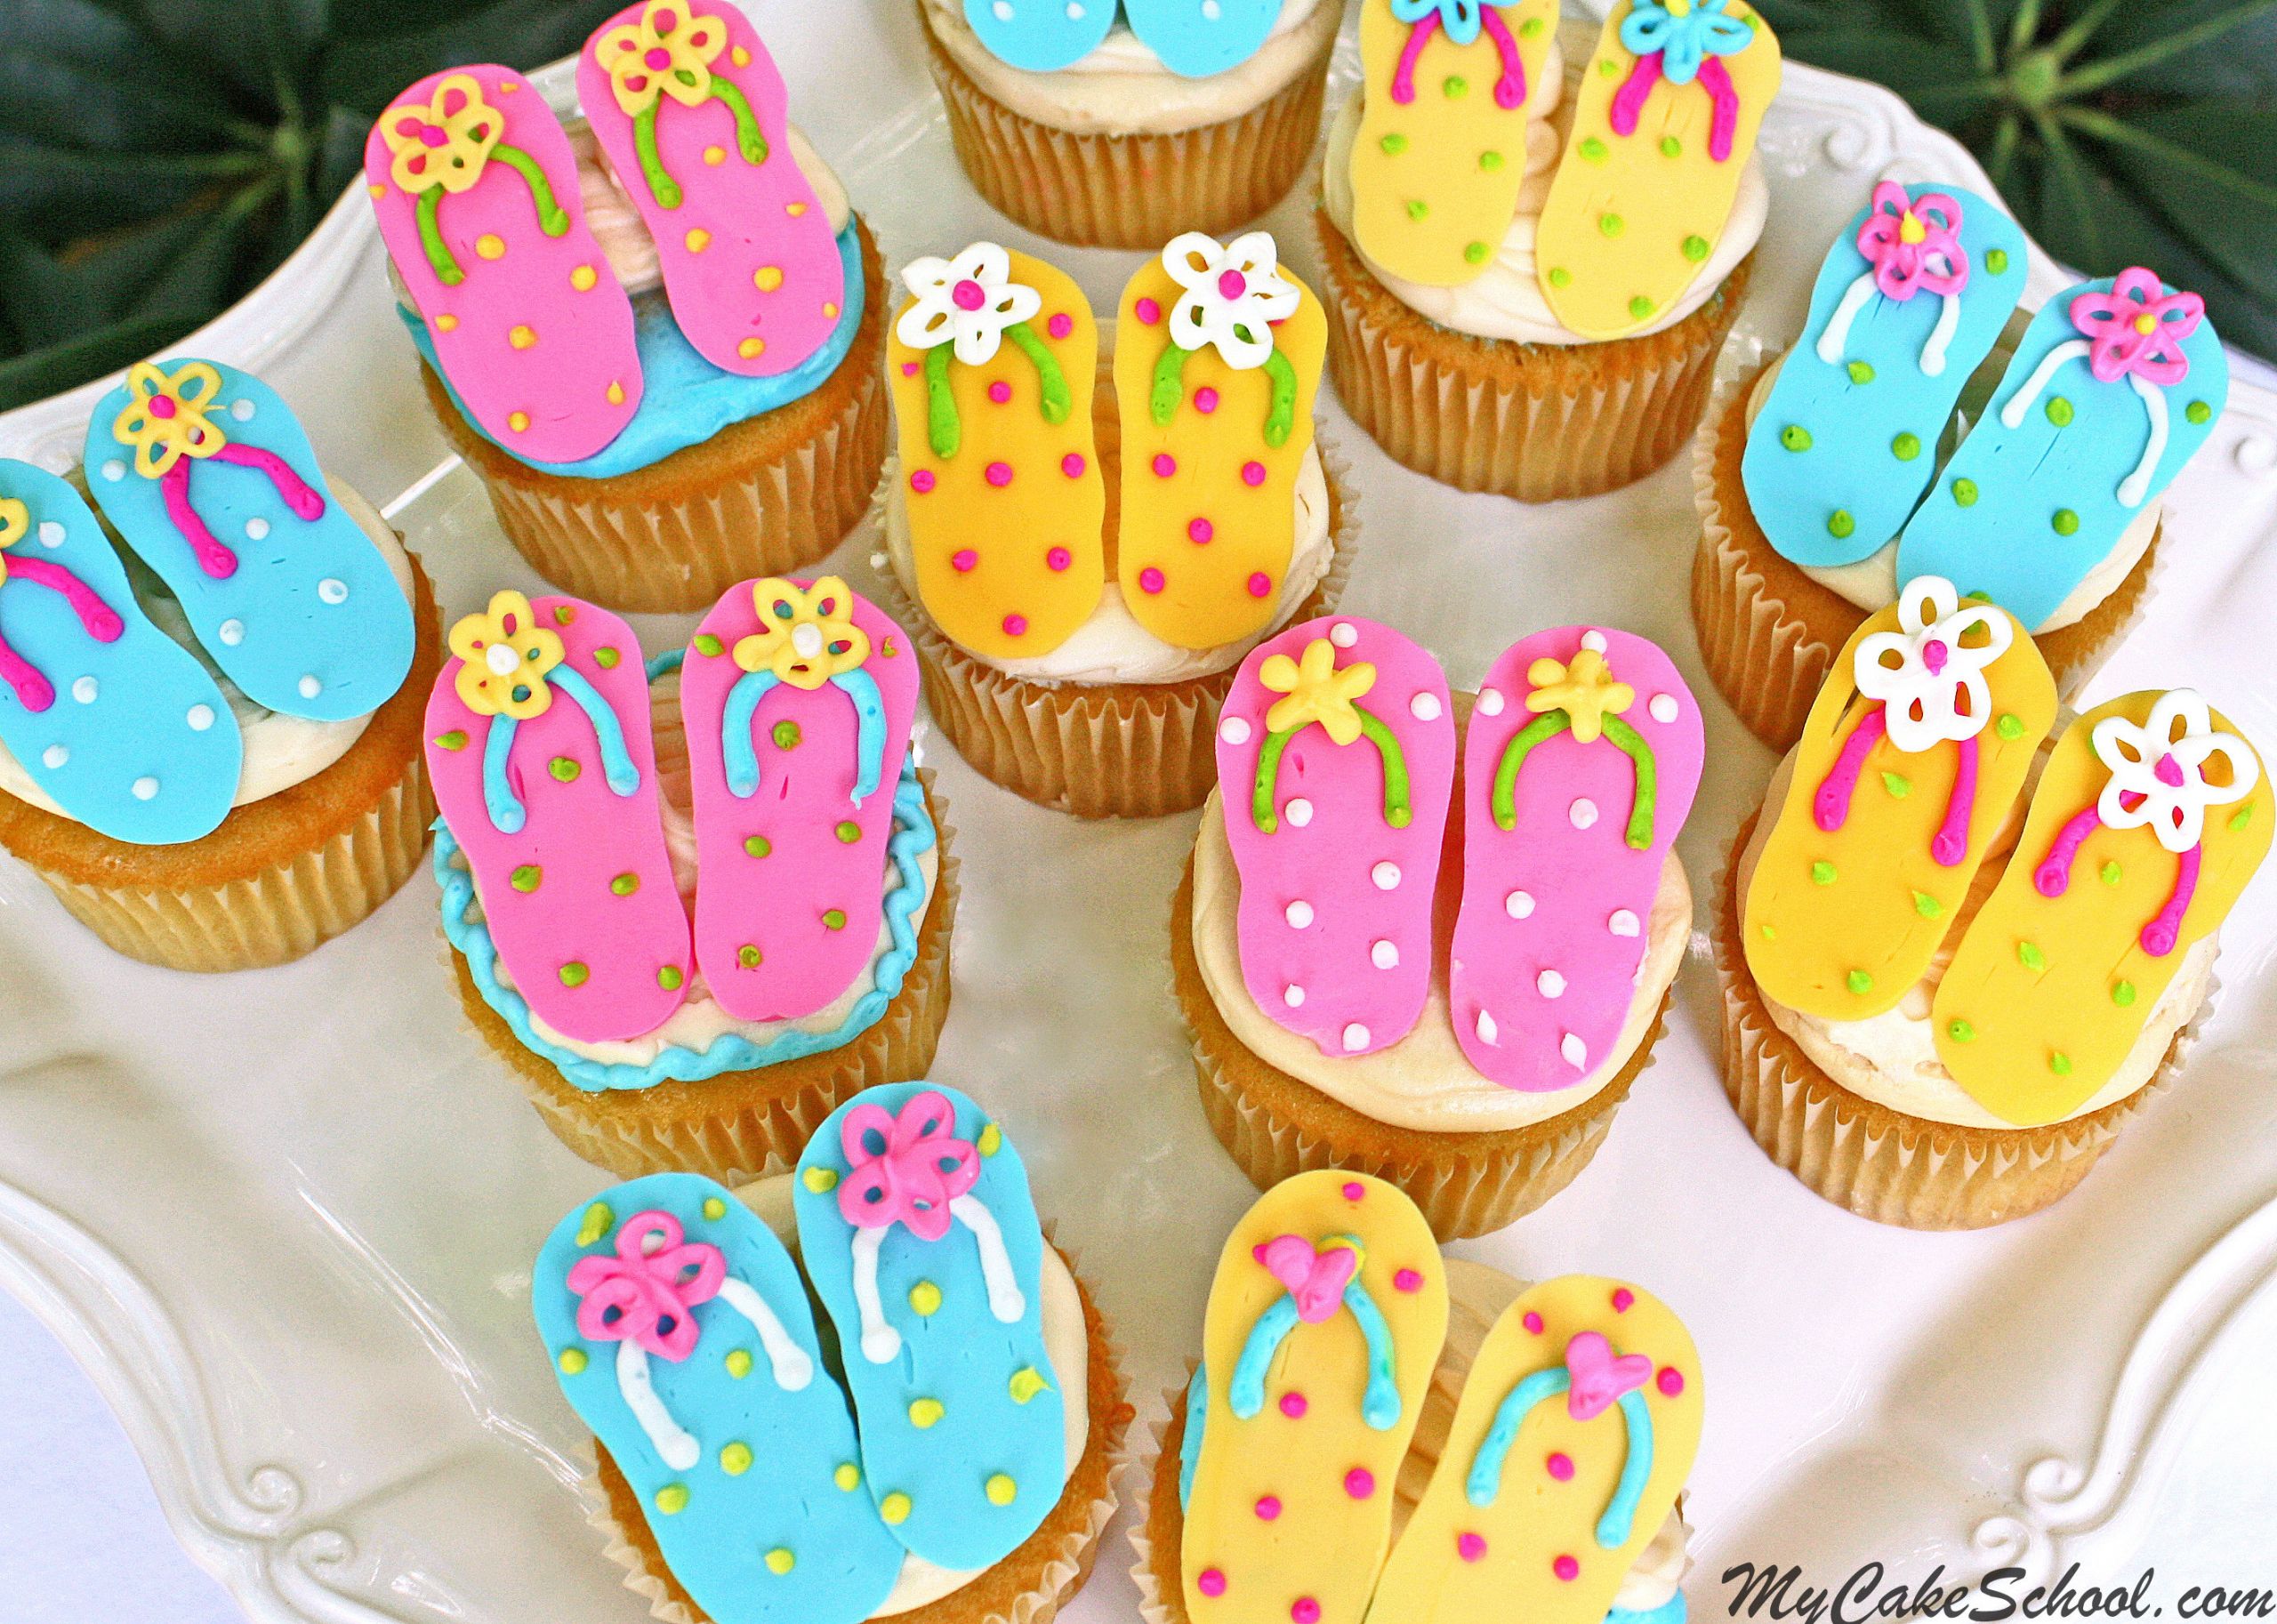 Easy Cupcake Decorating Ideas For Summer
 Flip Flop Cupcakes Free Tutorial